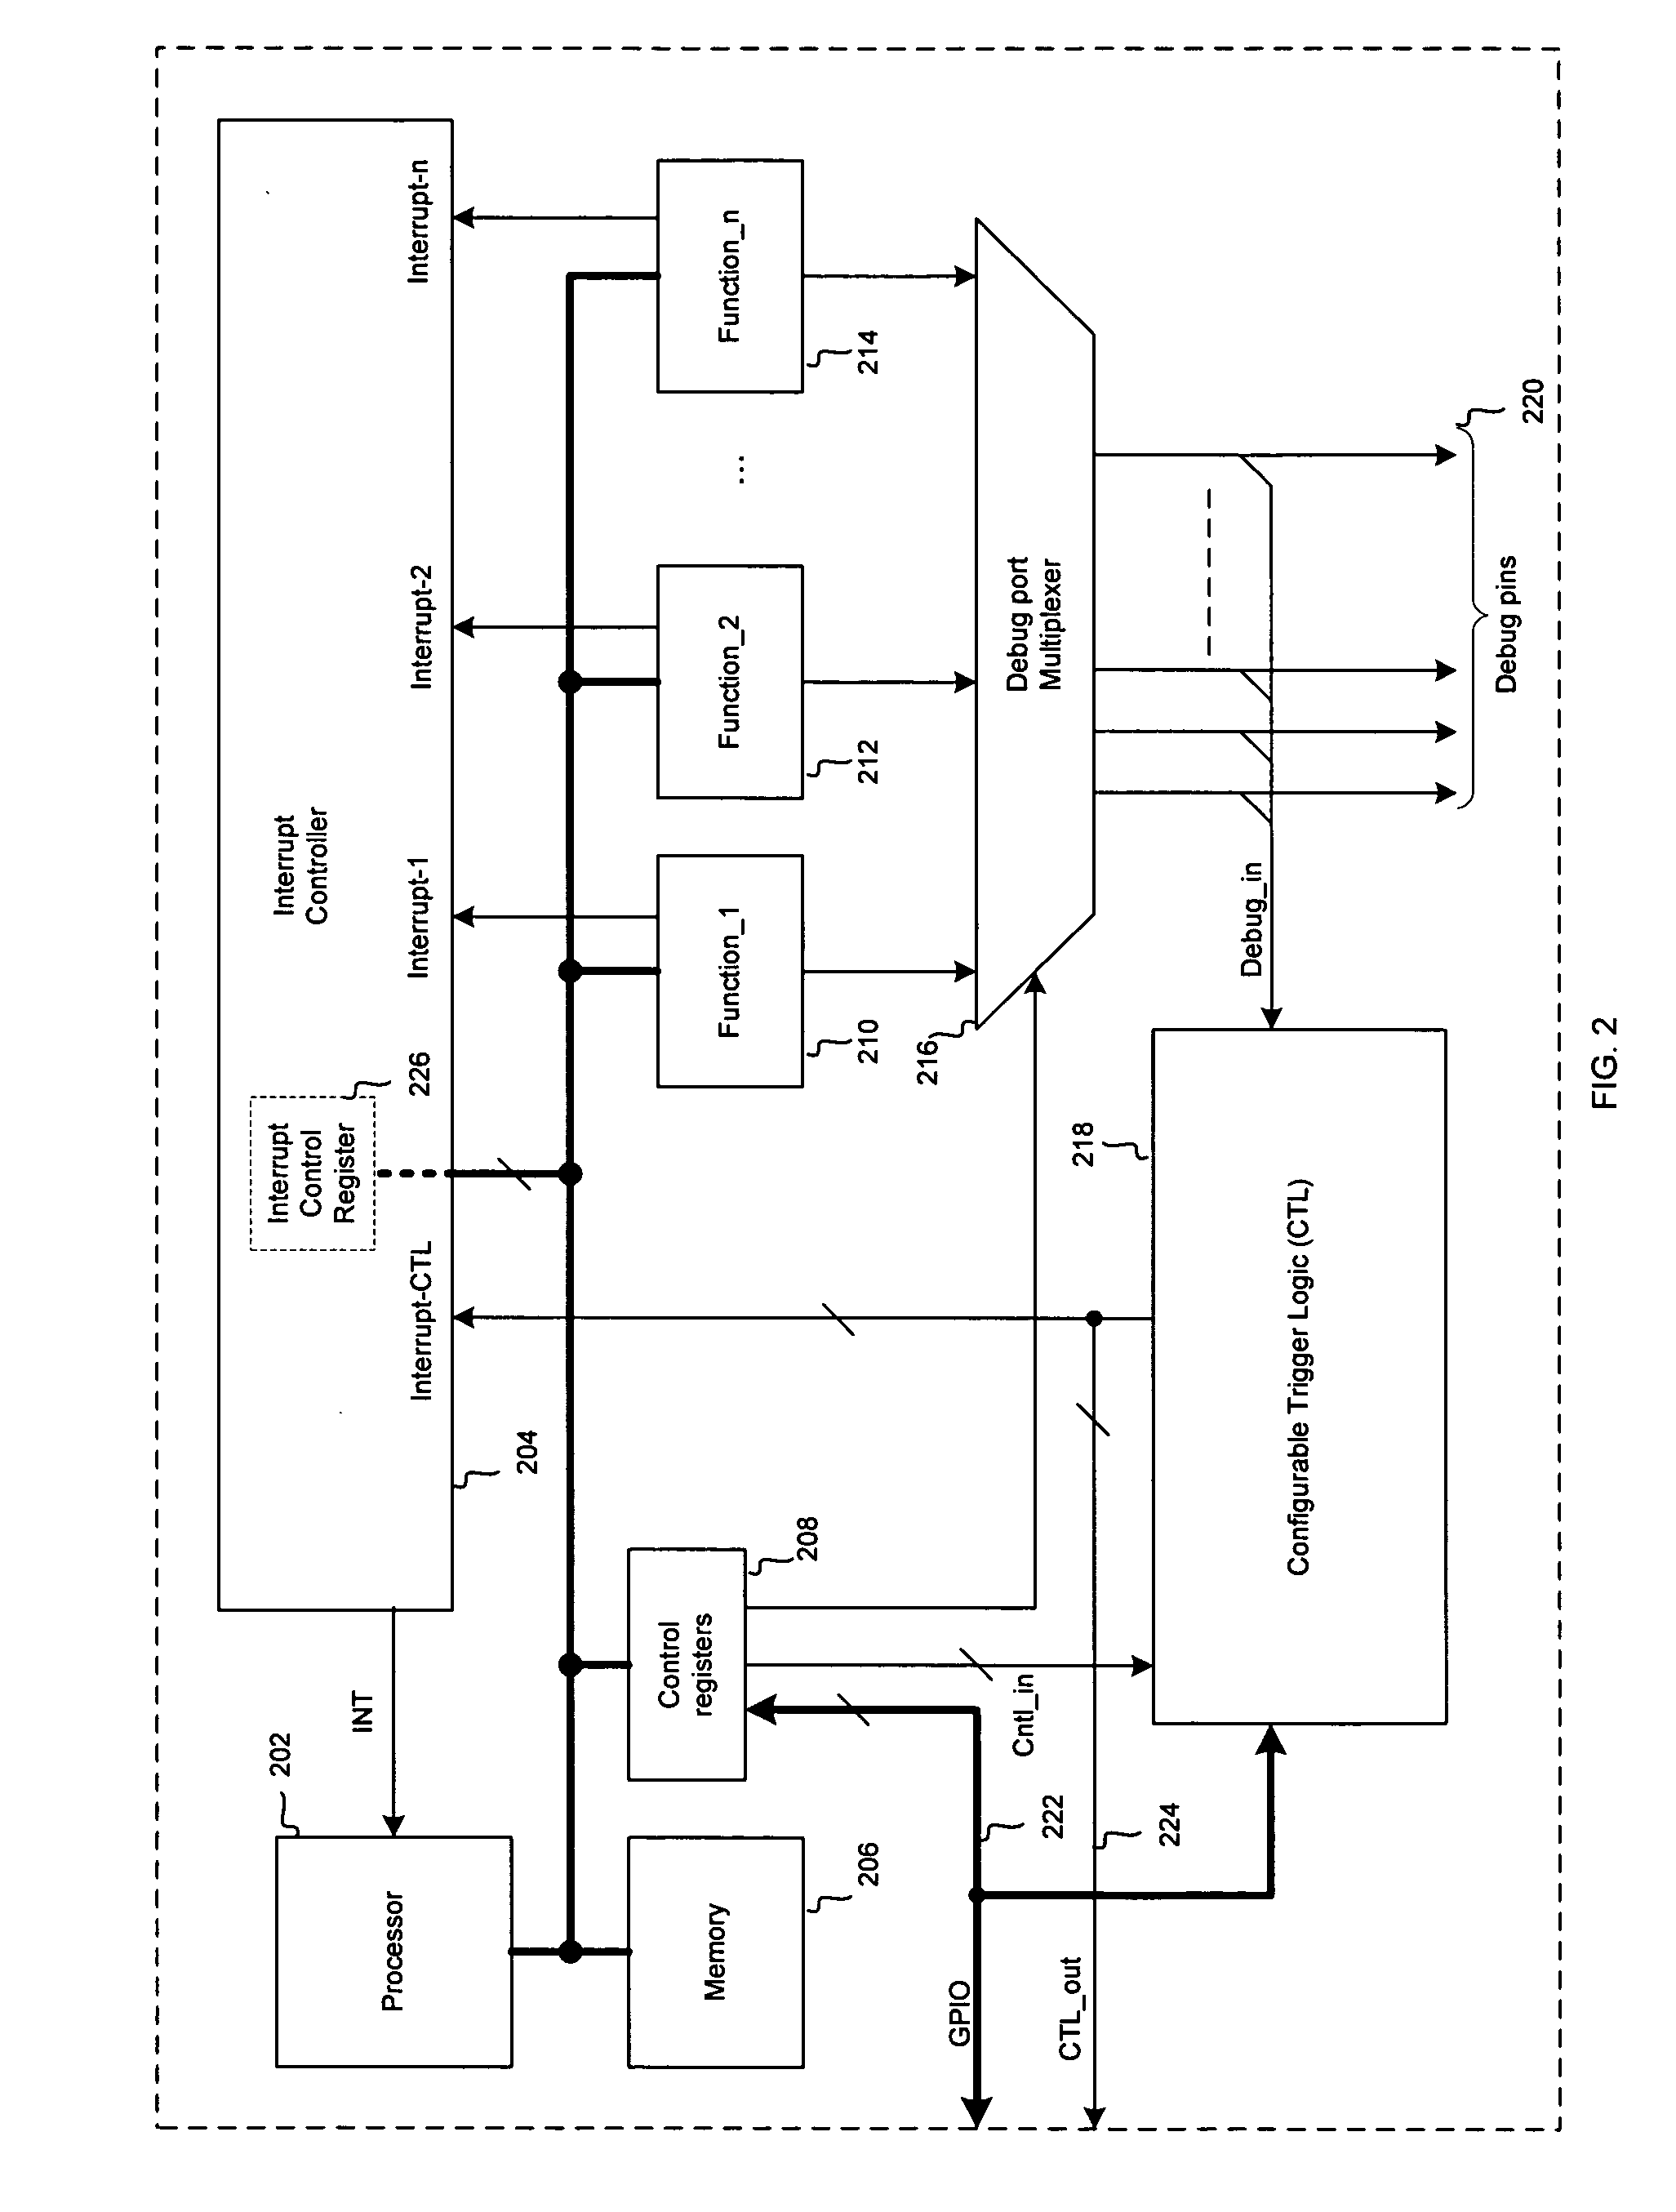 Method and system for configurable trigger logic for hardware bug workaround in integrated circuits